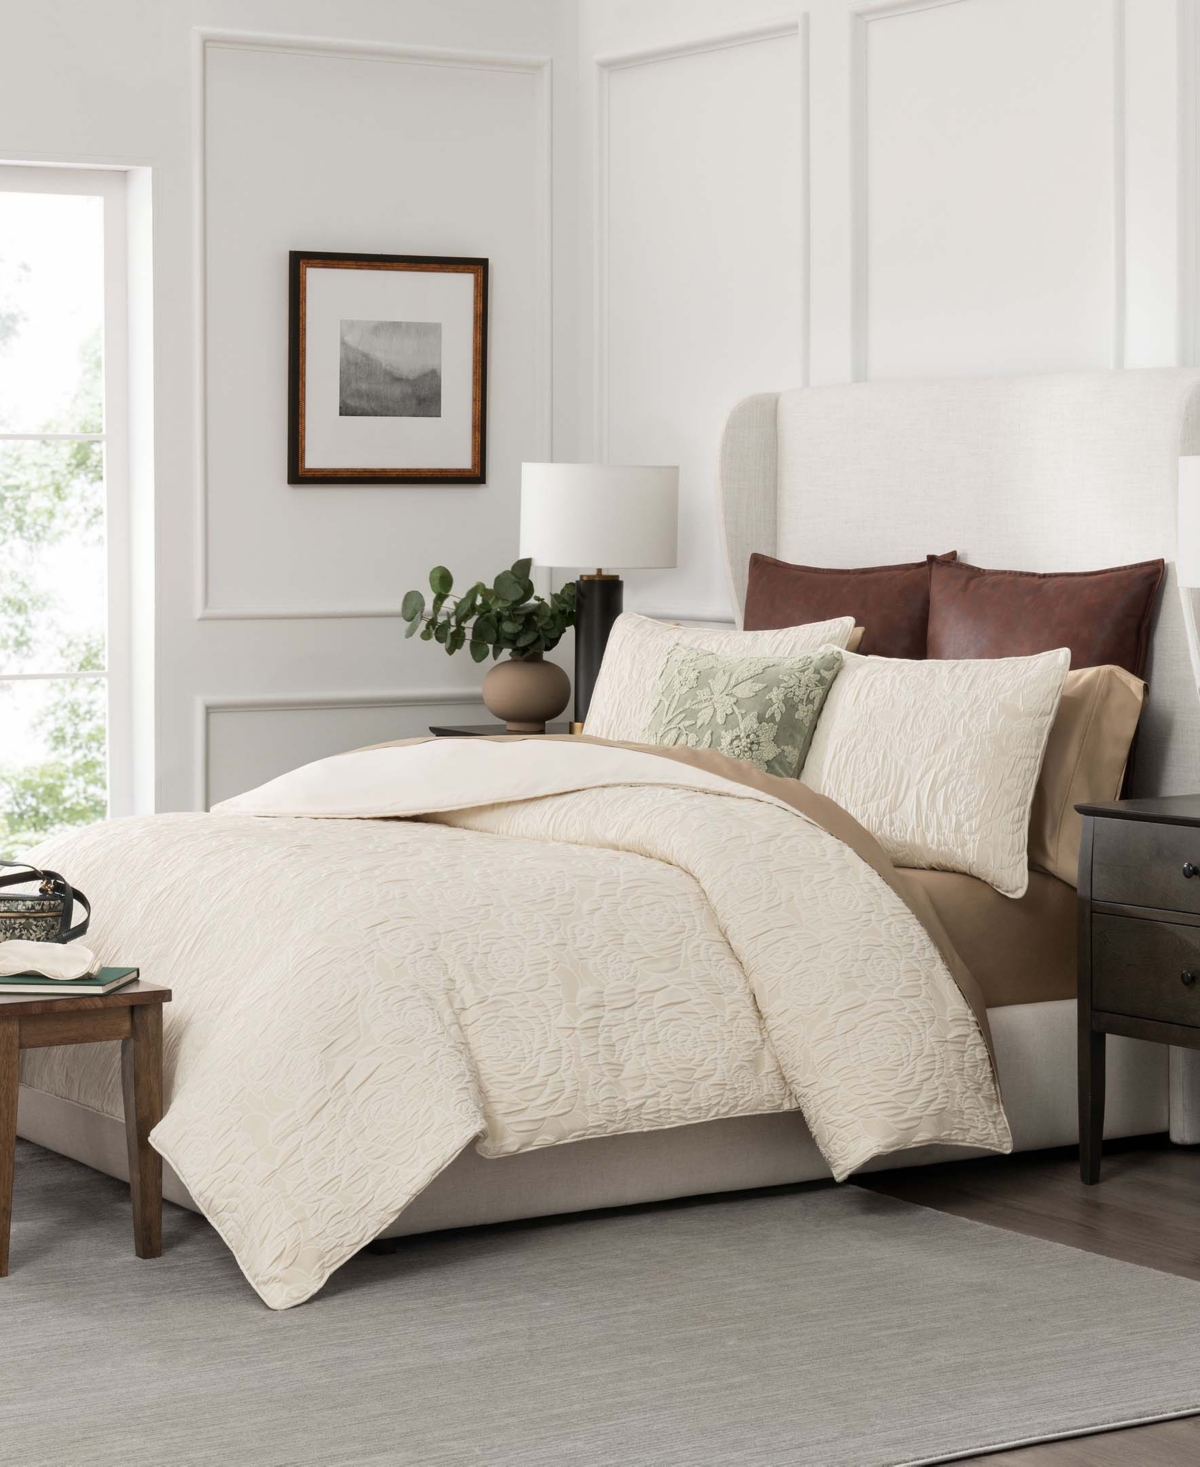 Patricia Nash Rose Embossed Comforter 3-pc. Set, King In Taupe